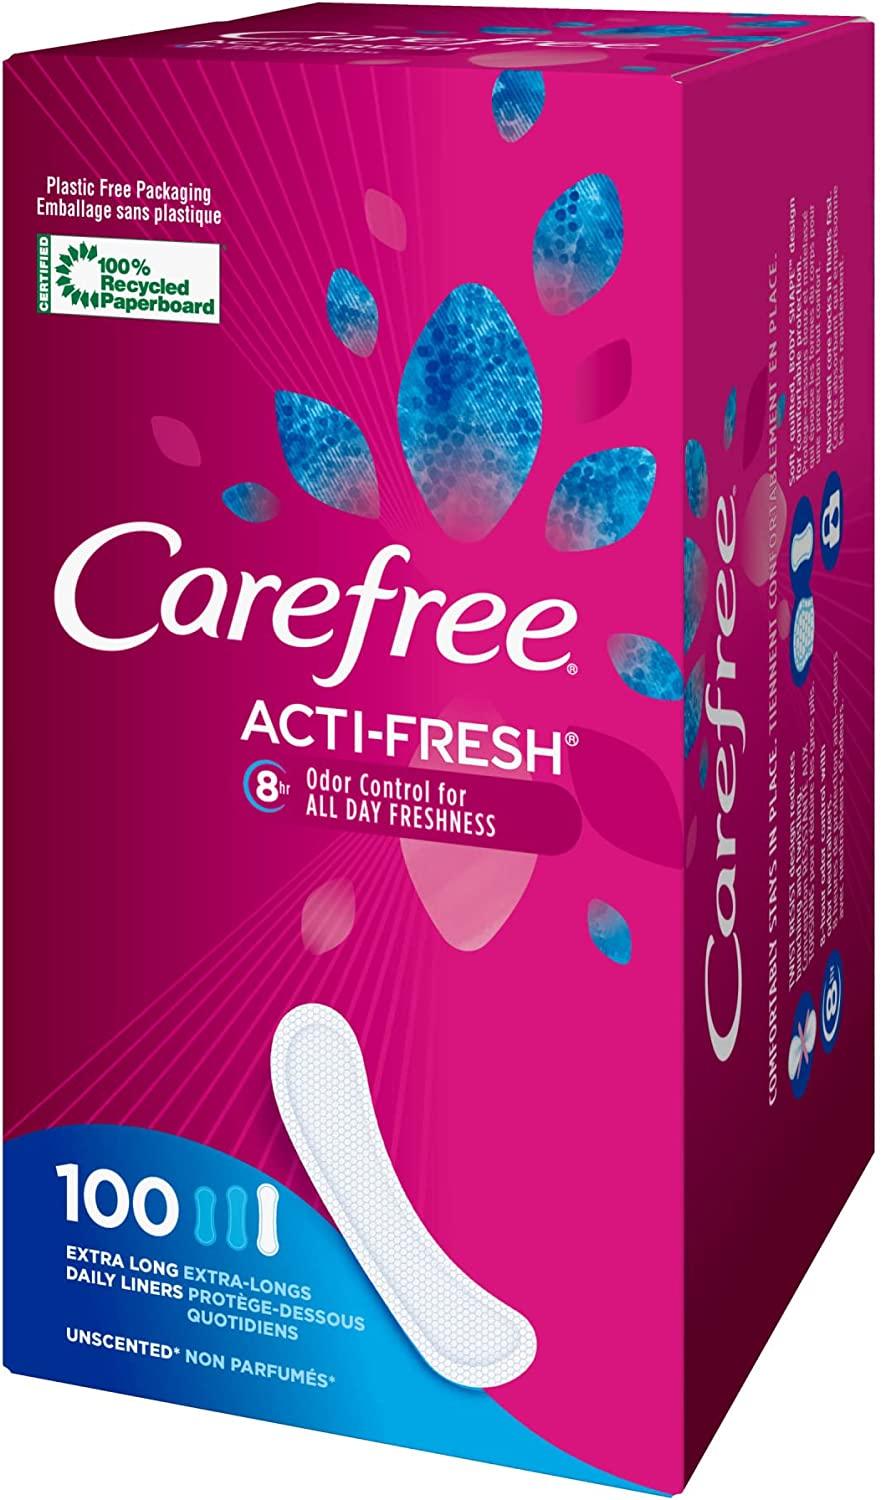 Carefree Breathe Panty Liners, Irritation-Free Protection, Individually